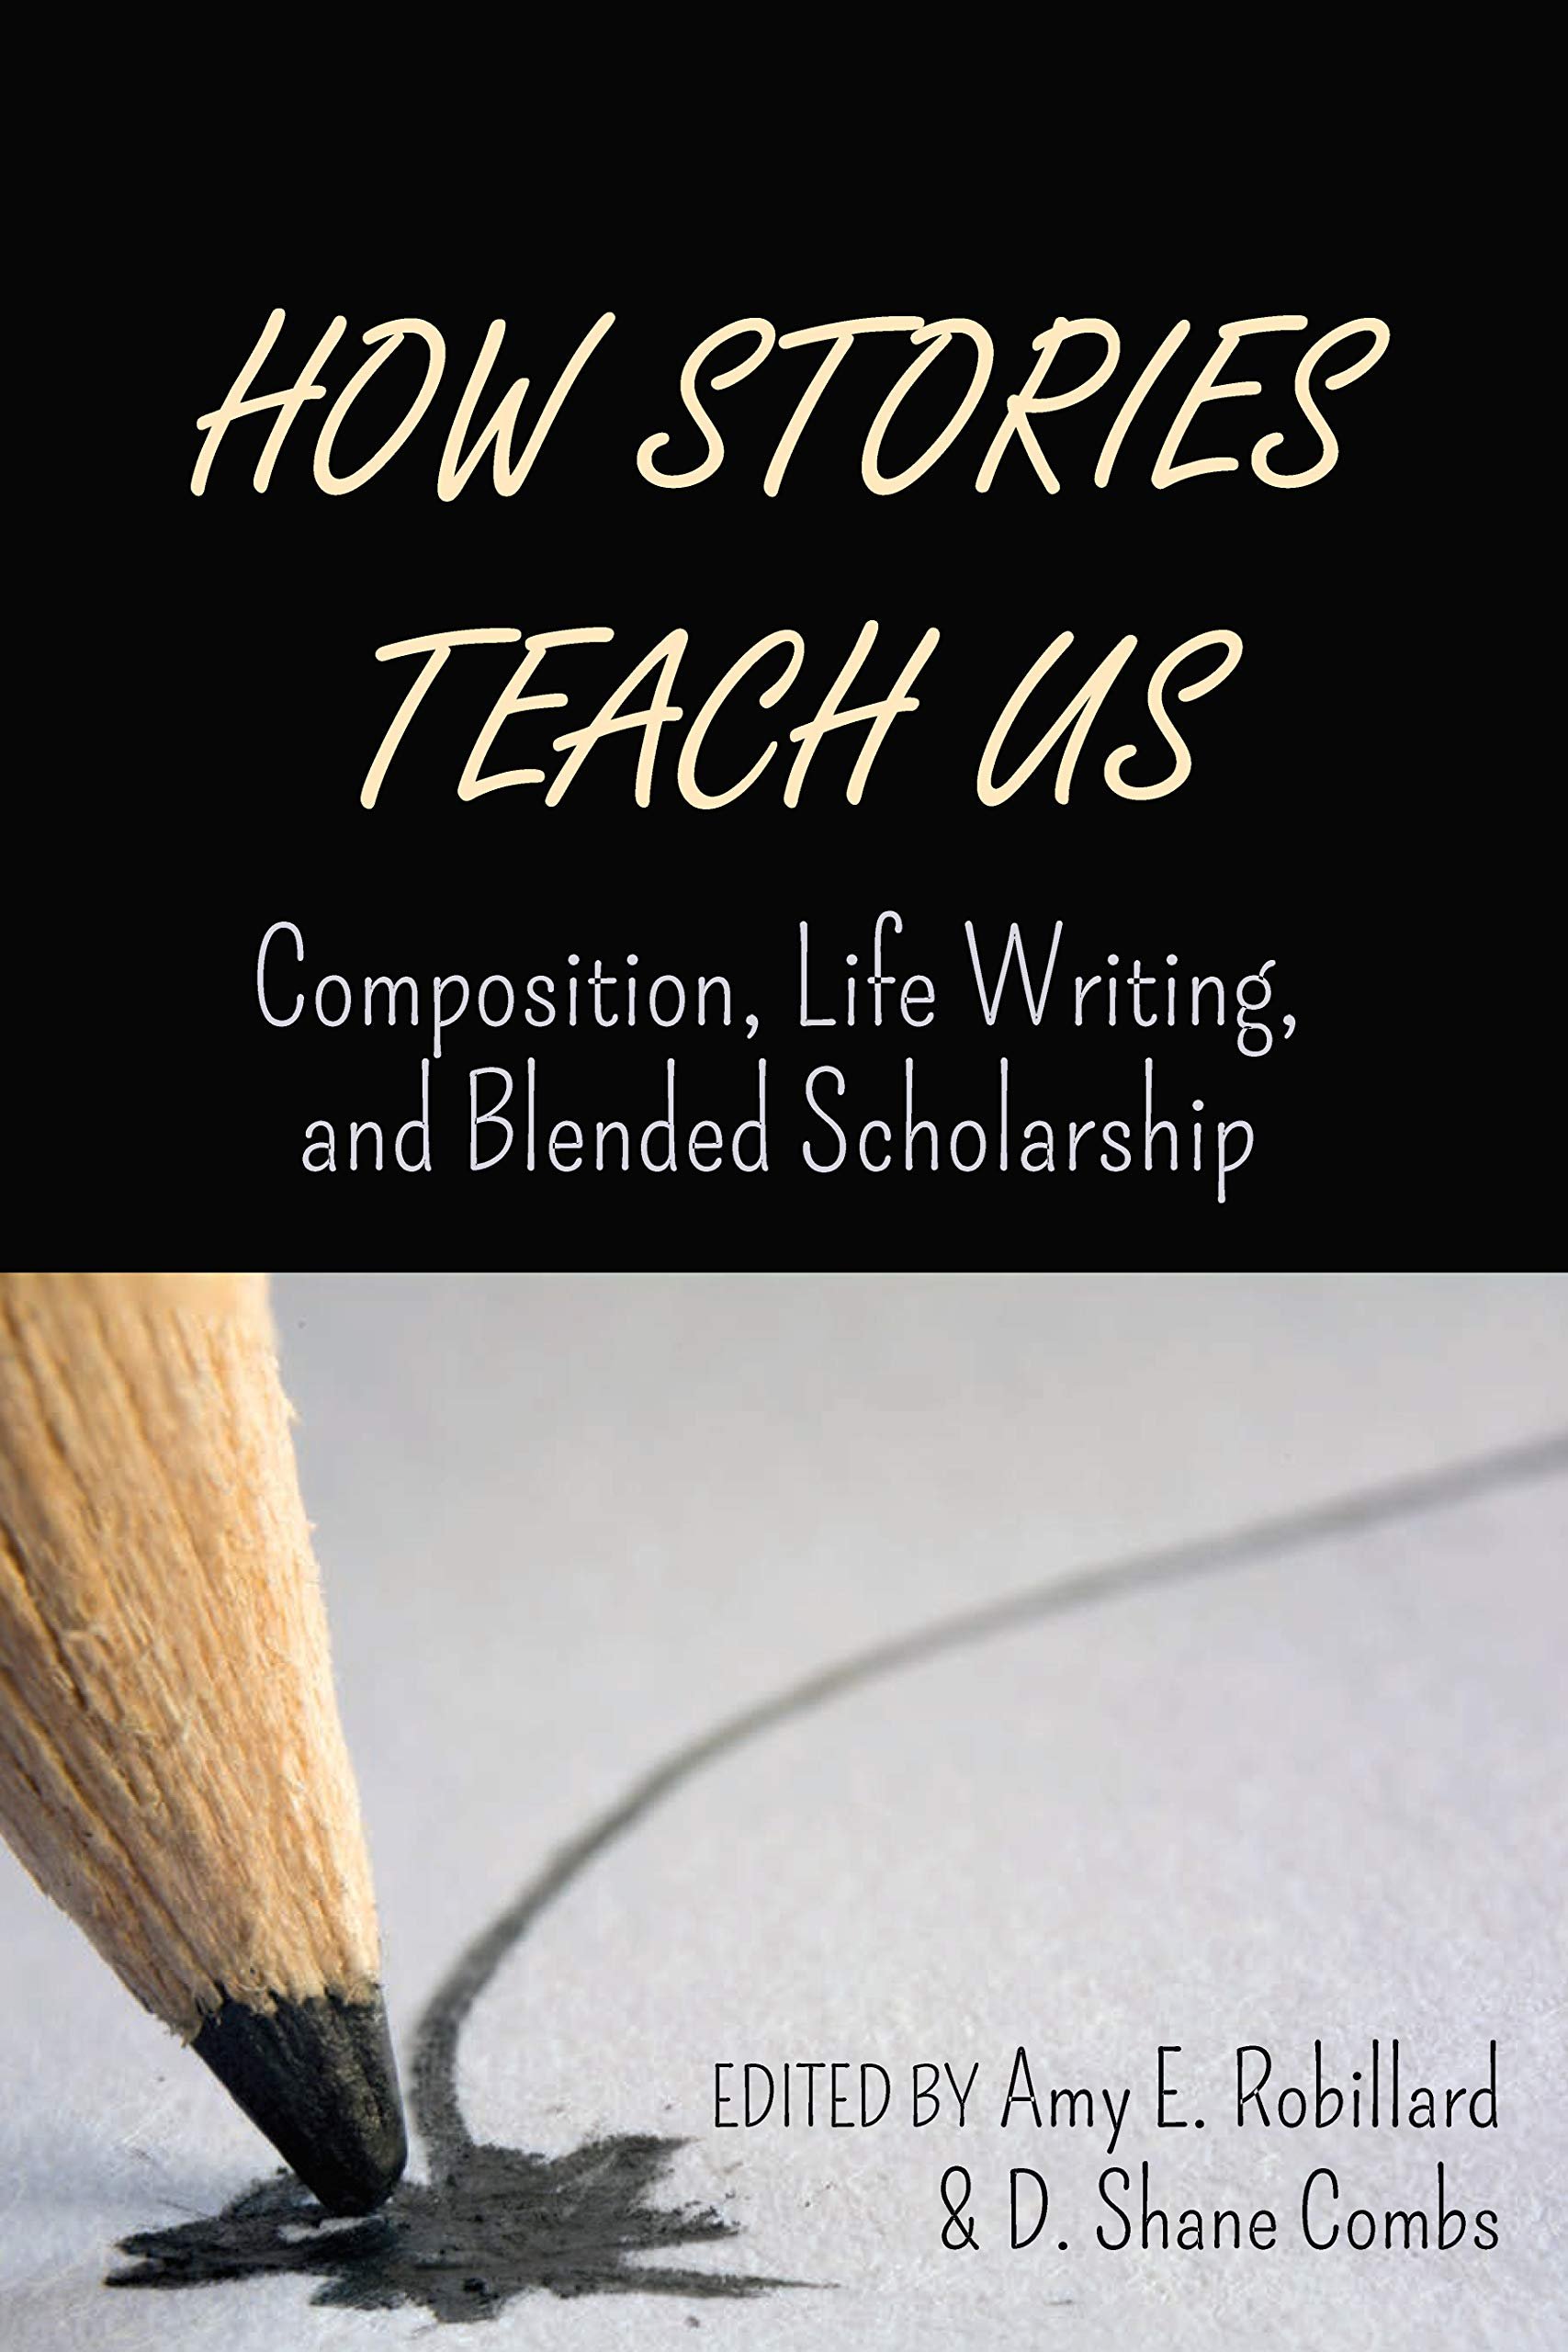 How Stories Teach Us: Composition, Life Writing, and Blended Scholarship